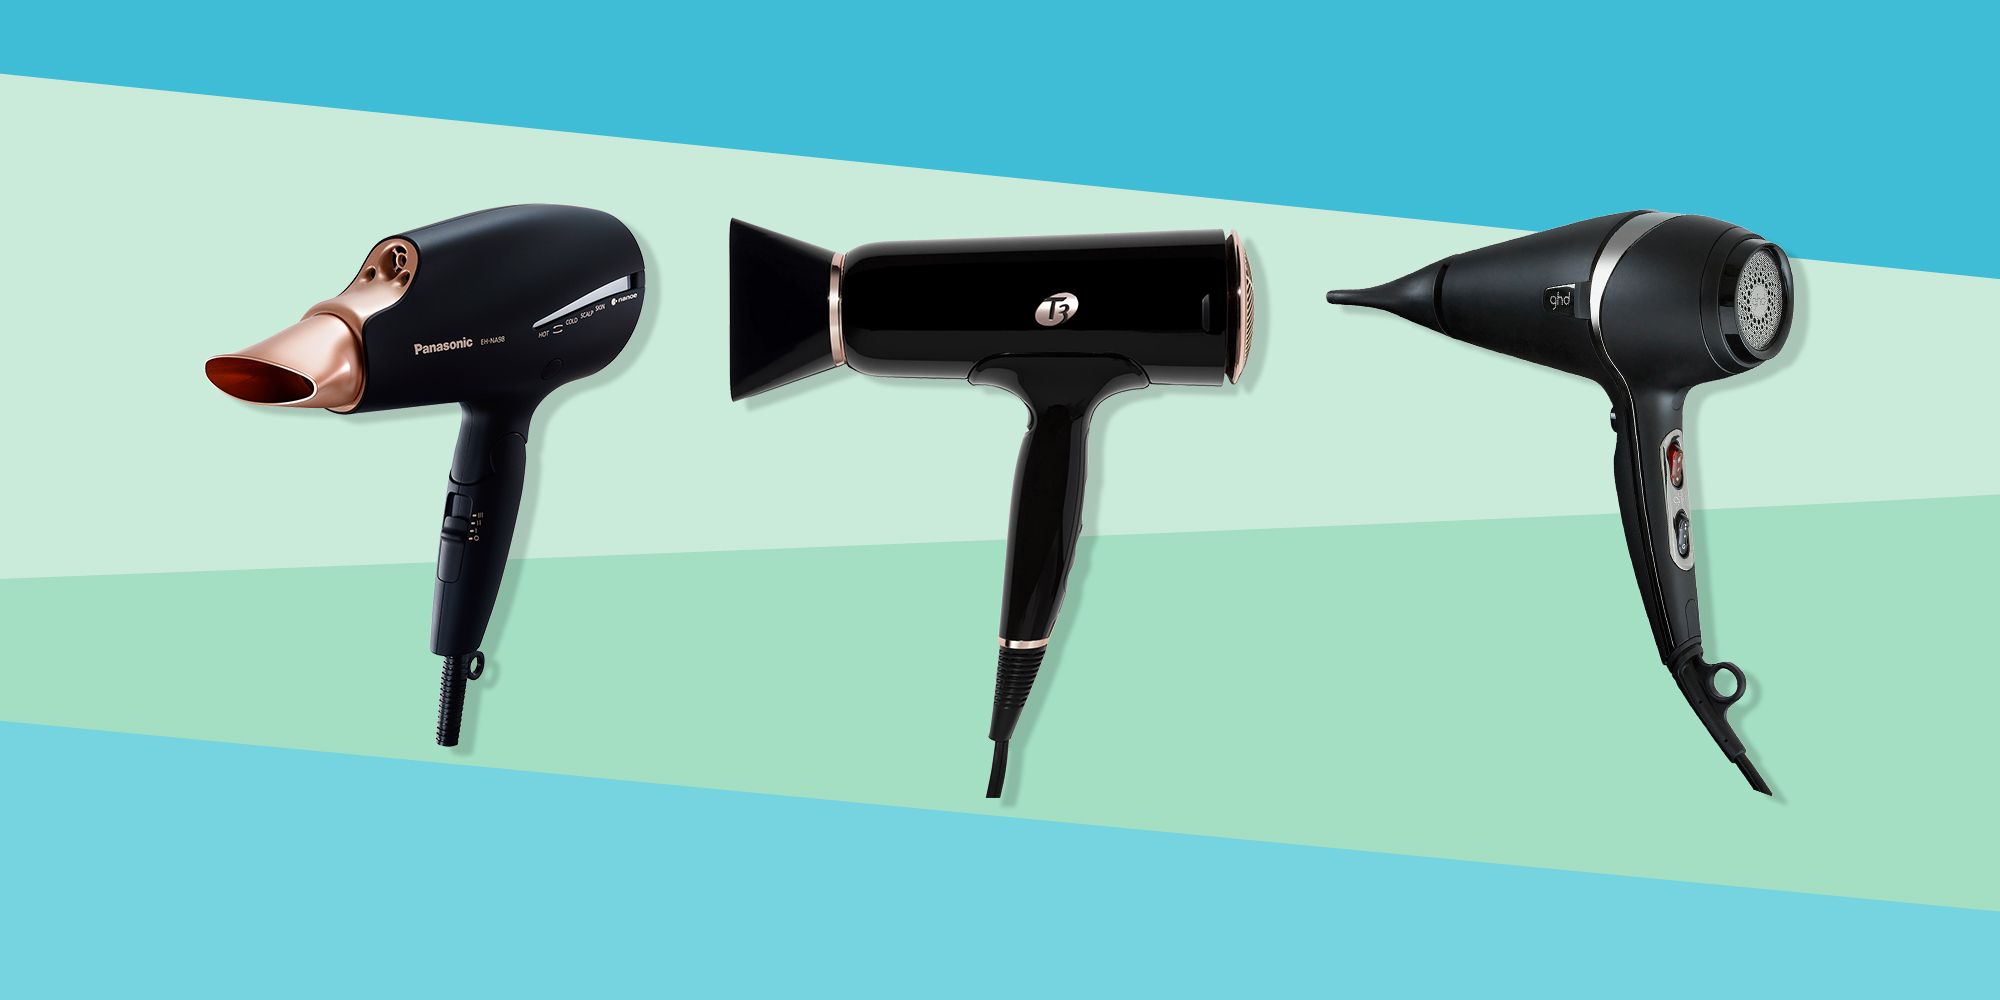 14 Best Hair Dryers for Every Type of Hair